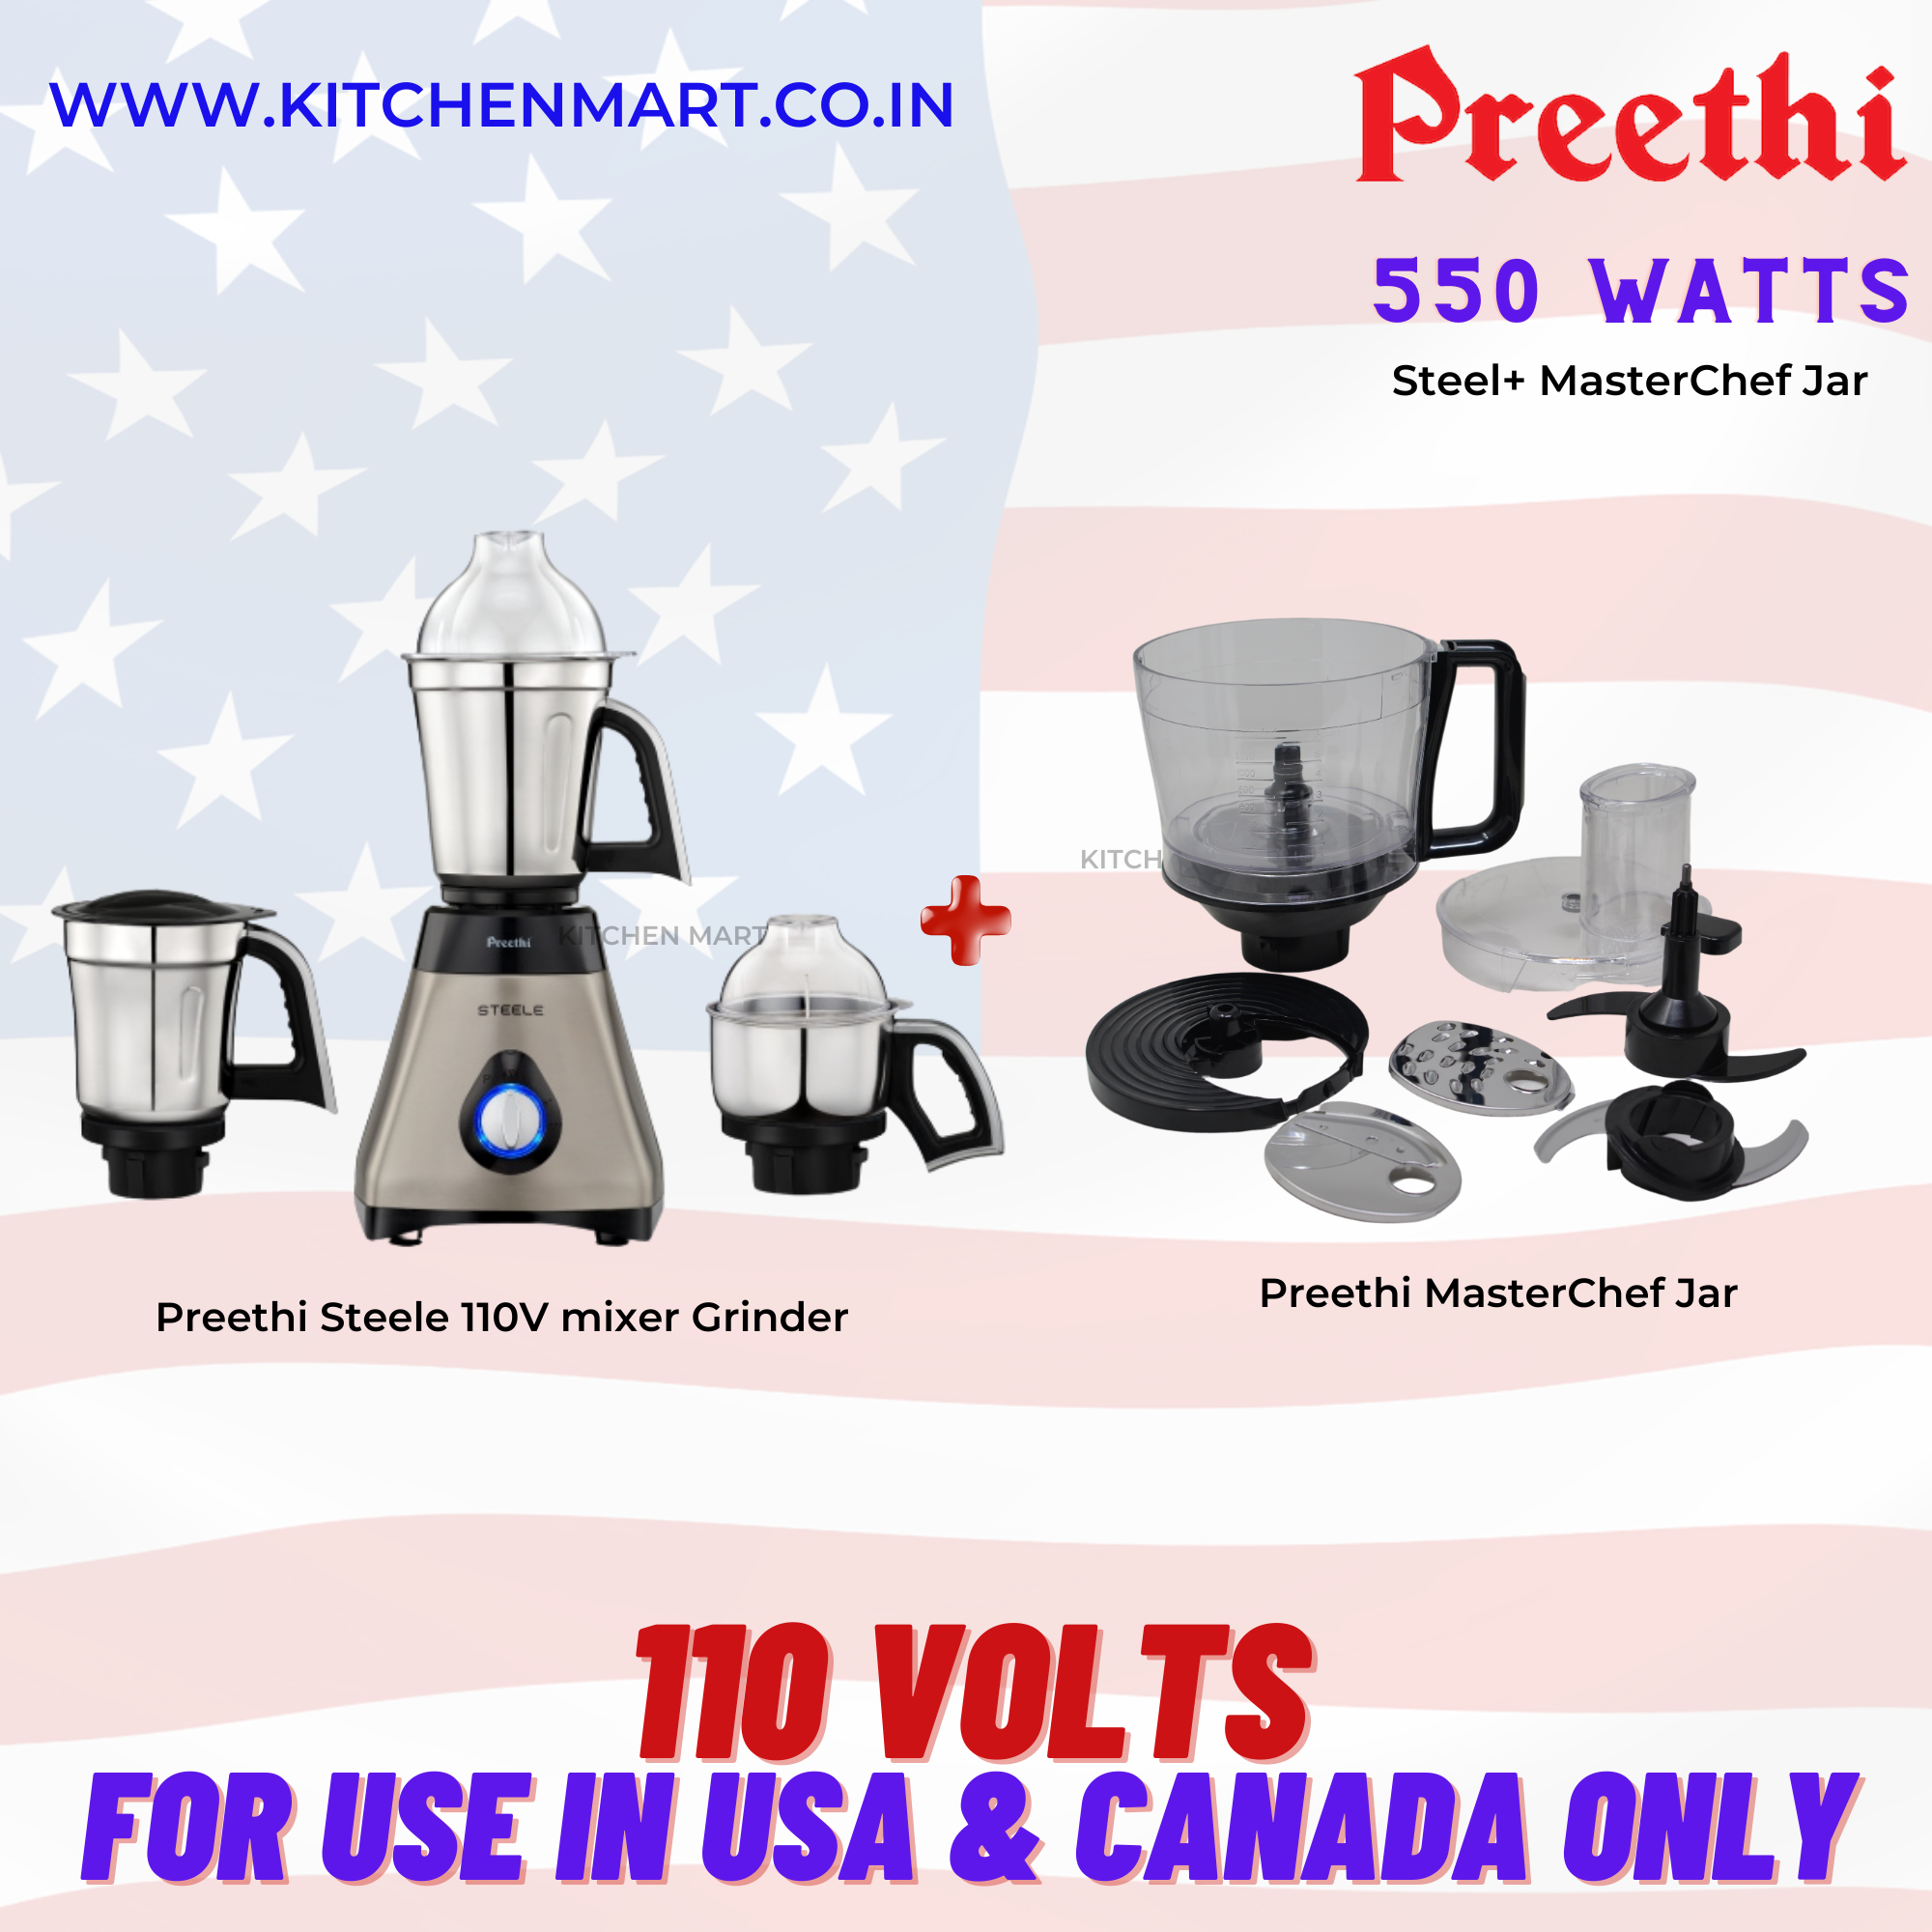 Preethi Steele MG 206 110V, 550-Watt Mixer Grinder with Masterchef Jar - 110 Volts EXCLUSIVELY for USA & Canada!